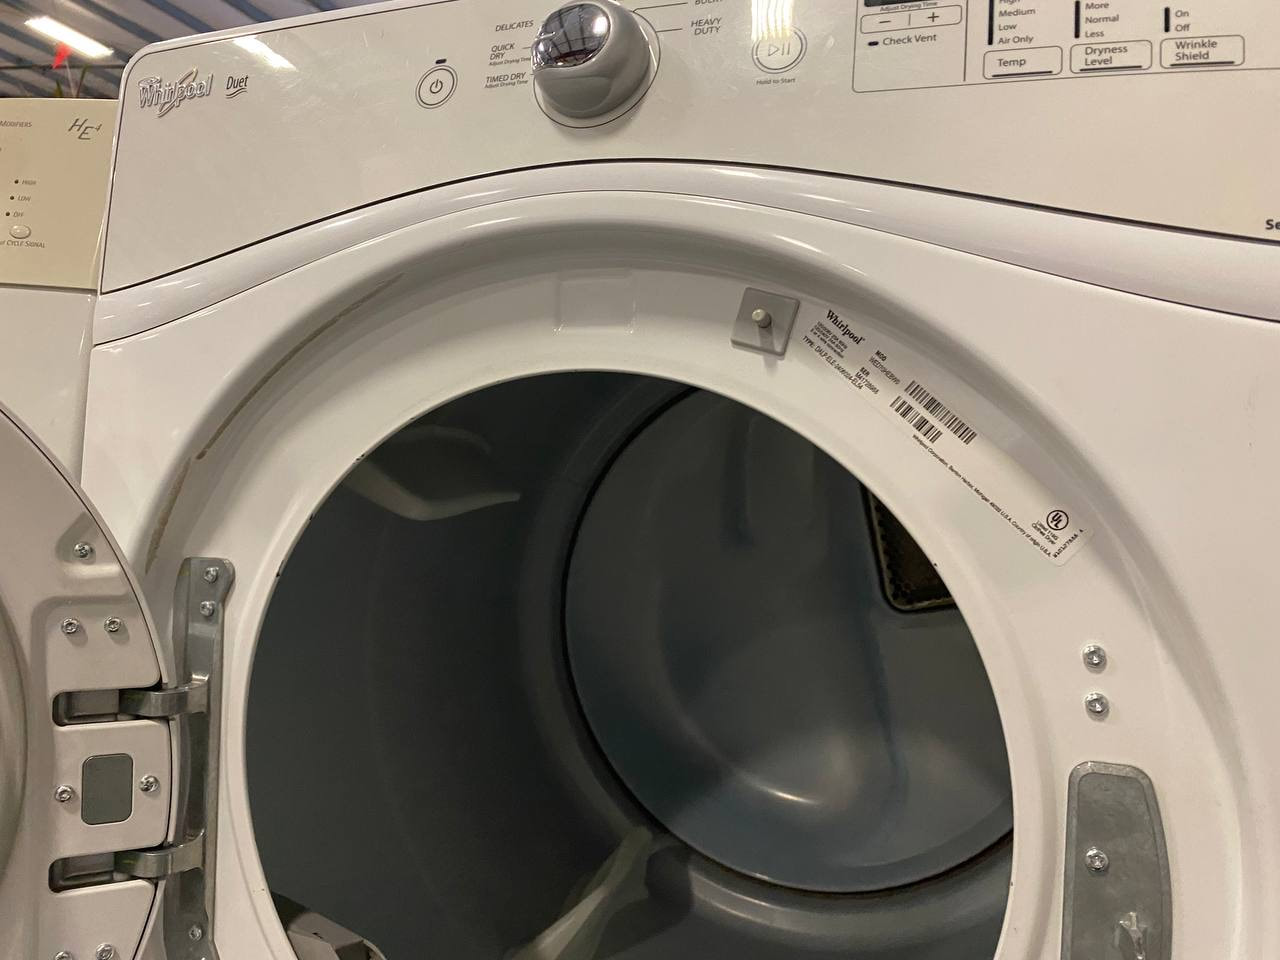 How To Fix The Error Code F56 For Whirlpool Washer